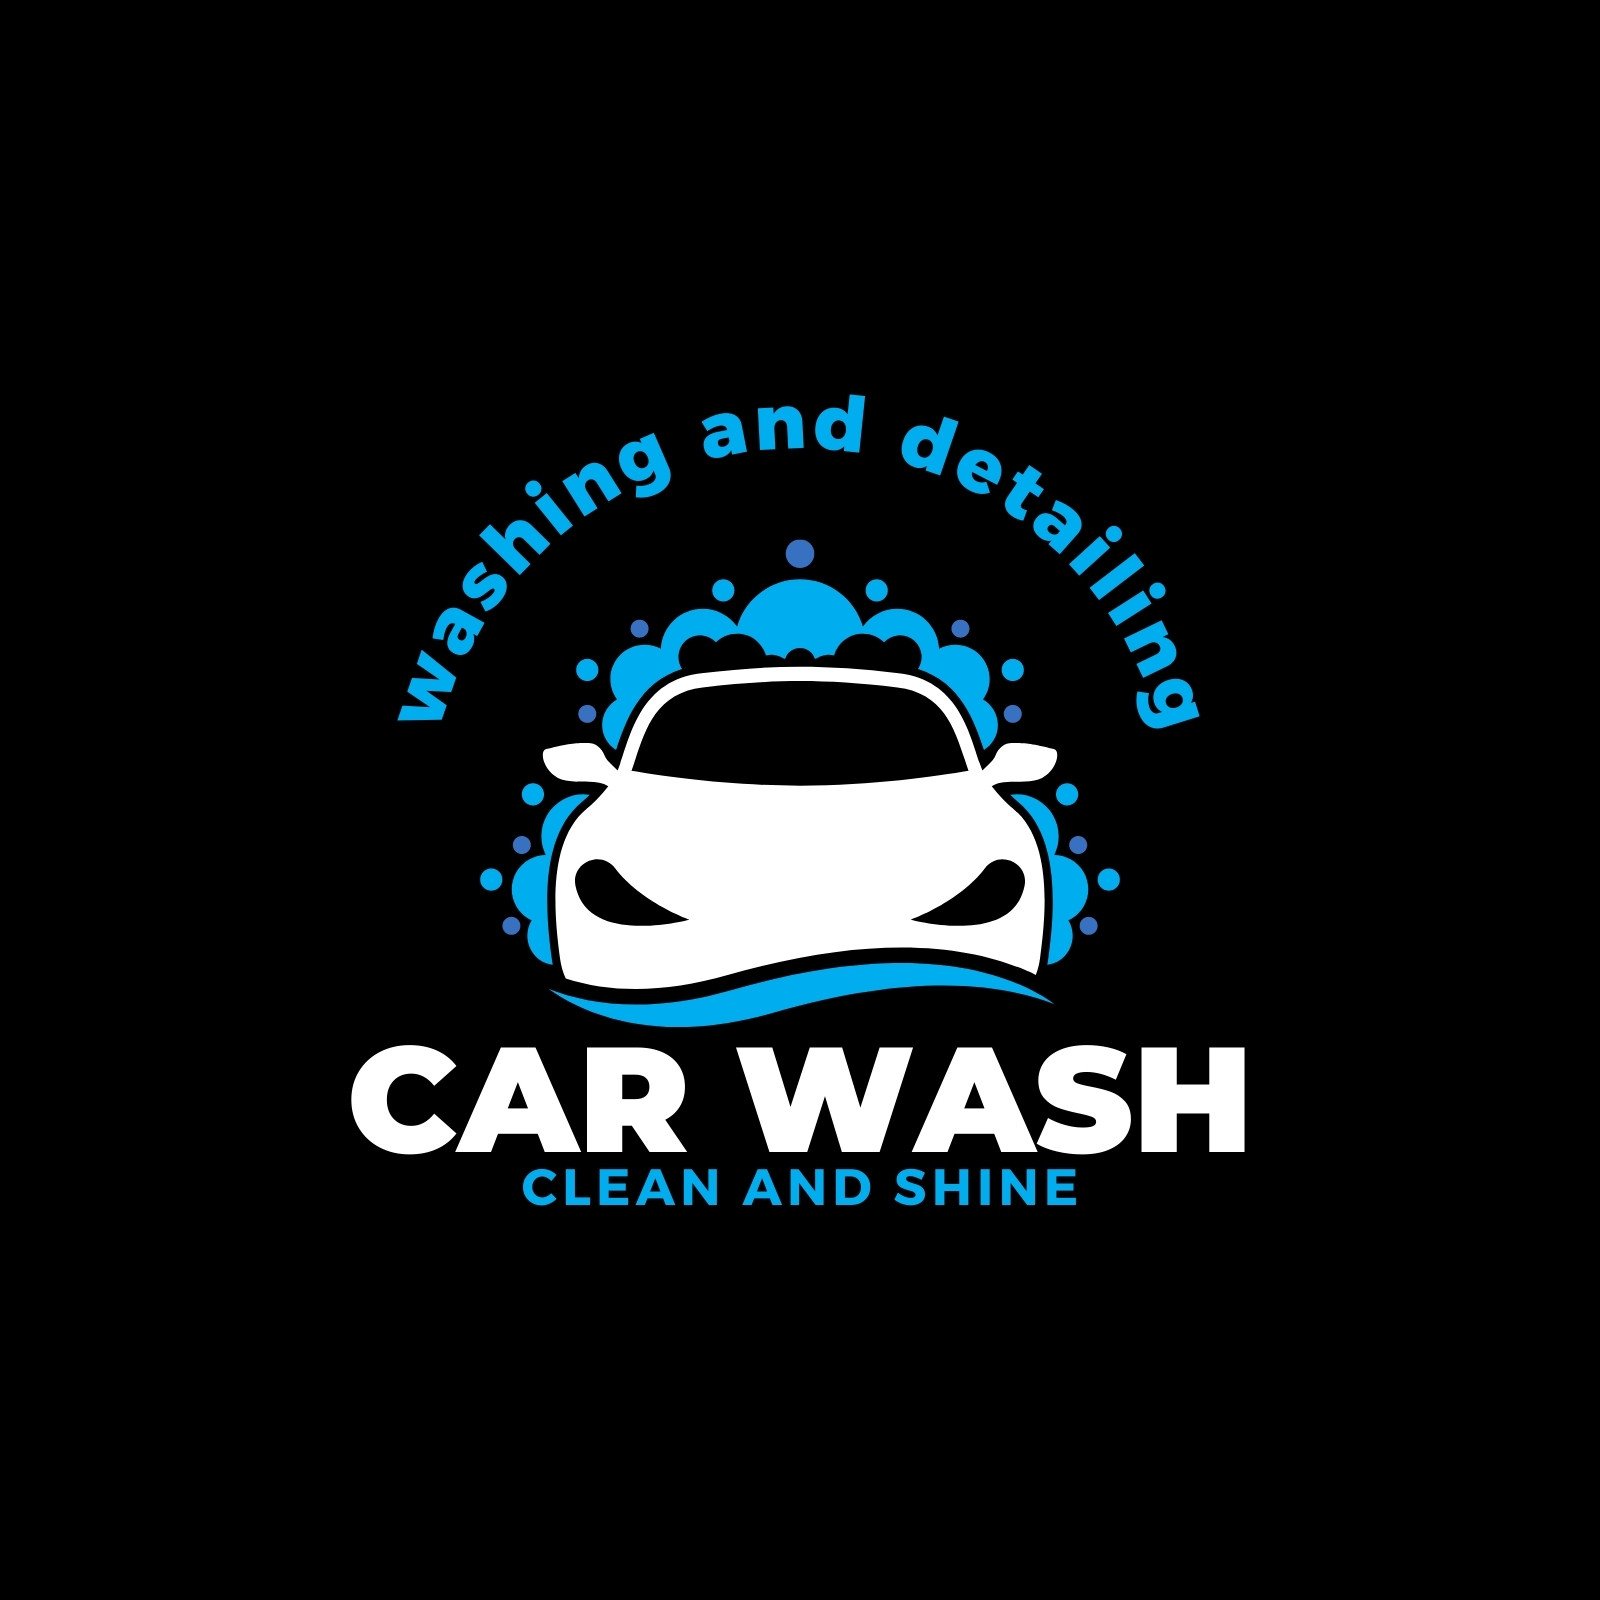 Simple Car Wash and Detailing Service Logo